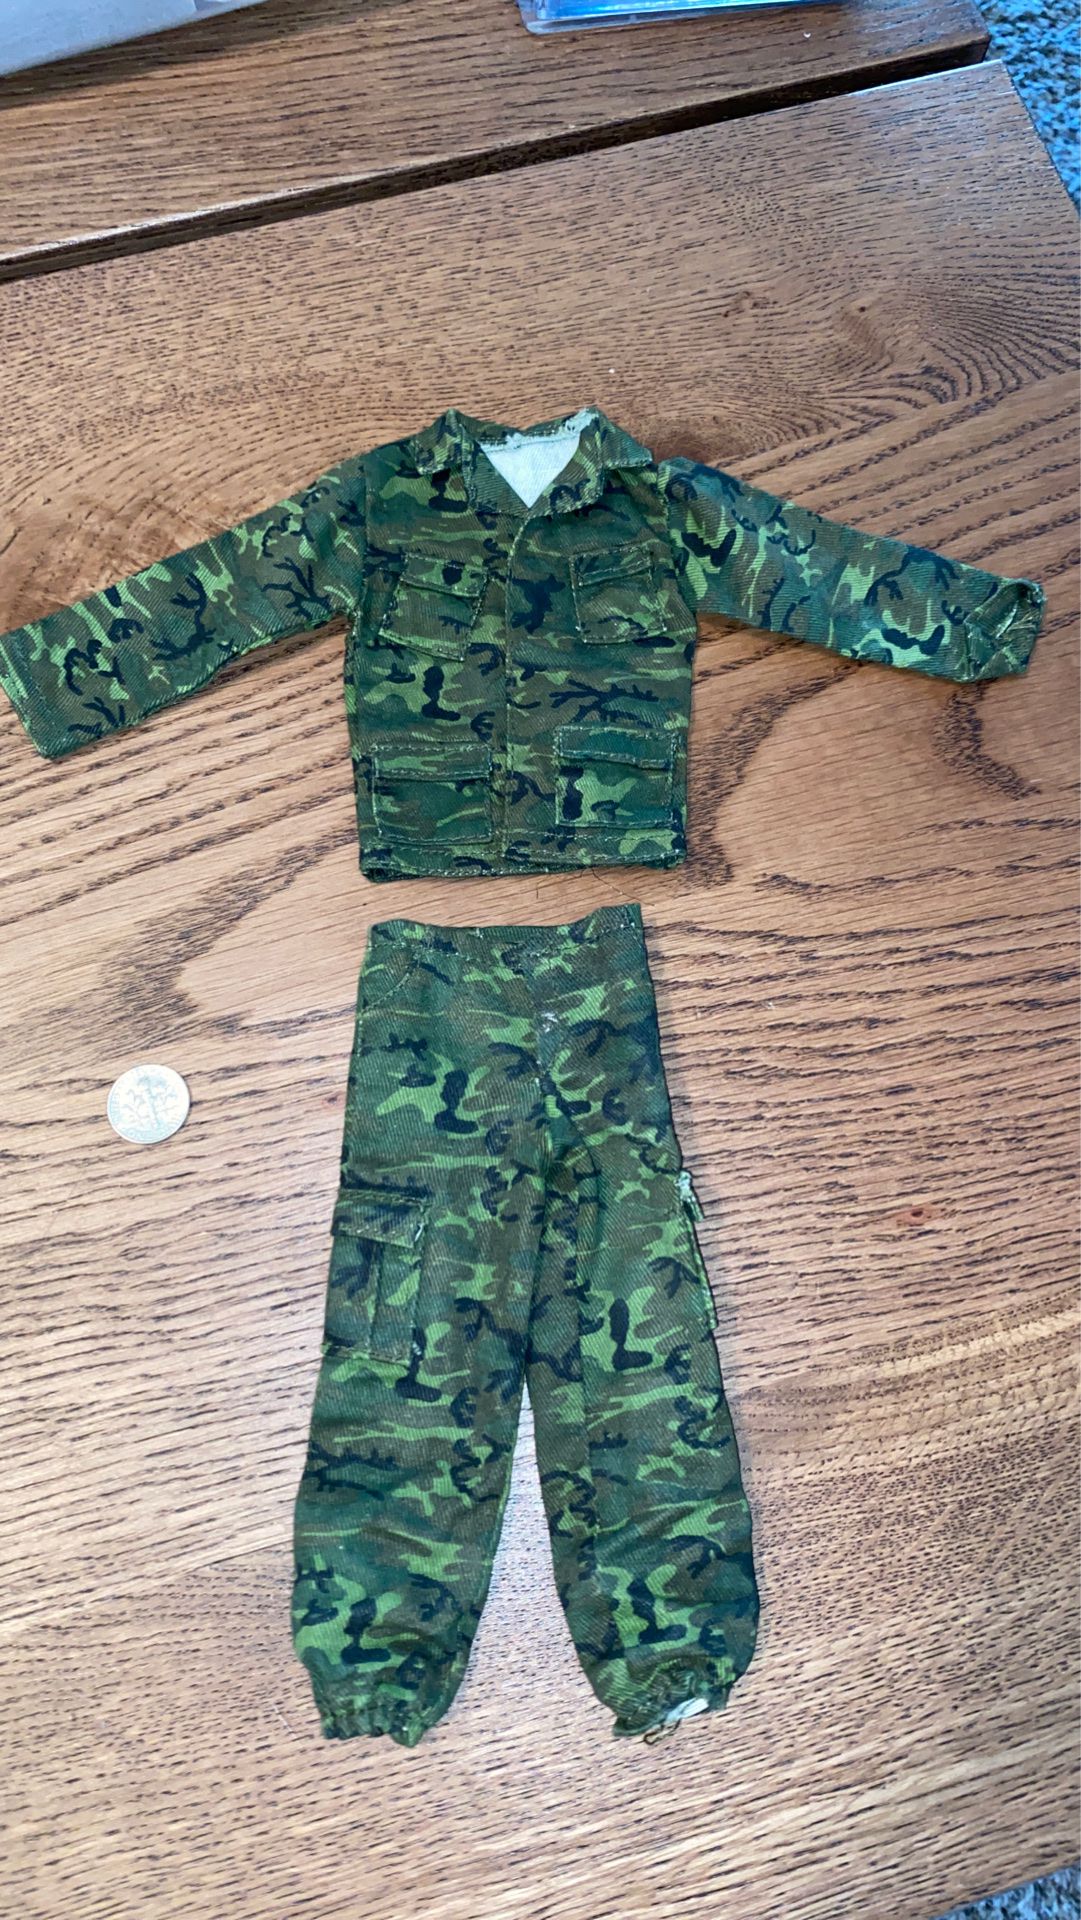 1/6 scale camouflage uniform for action Figures 12” inches Toys